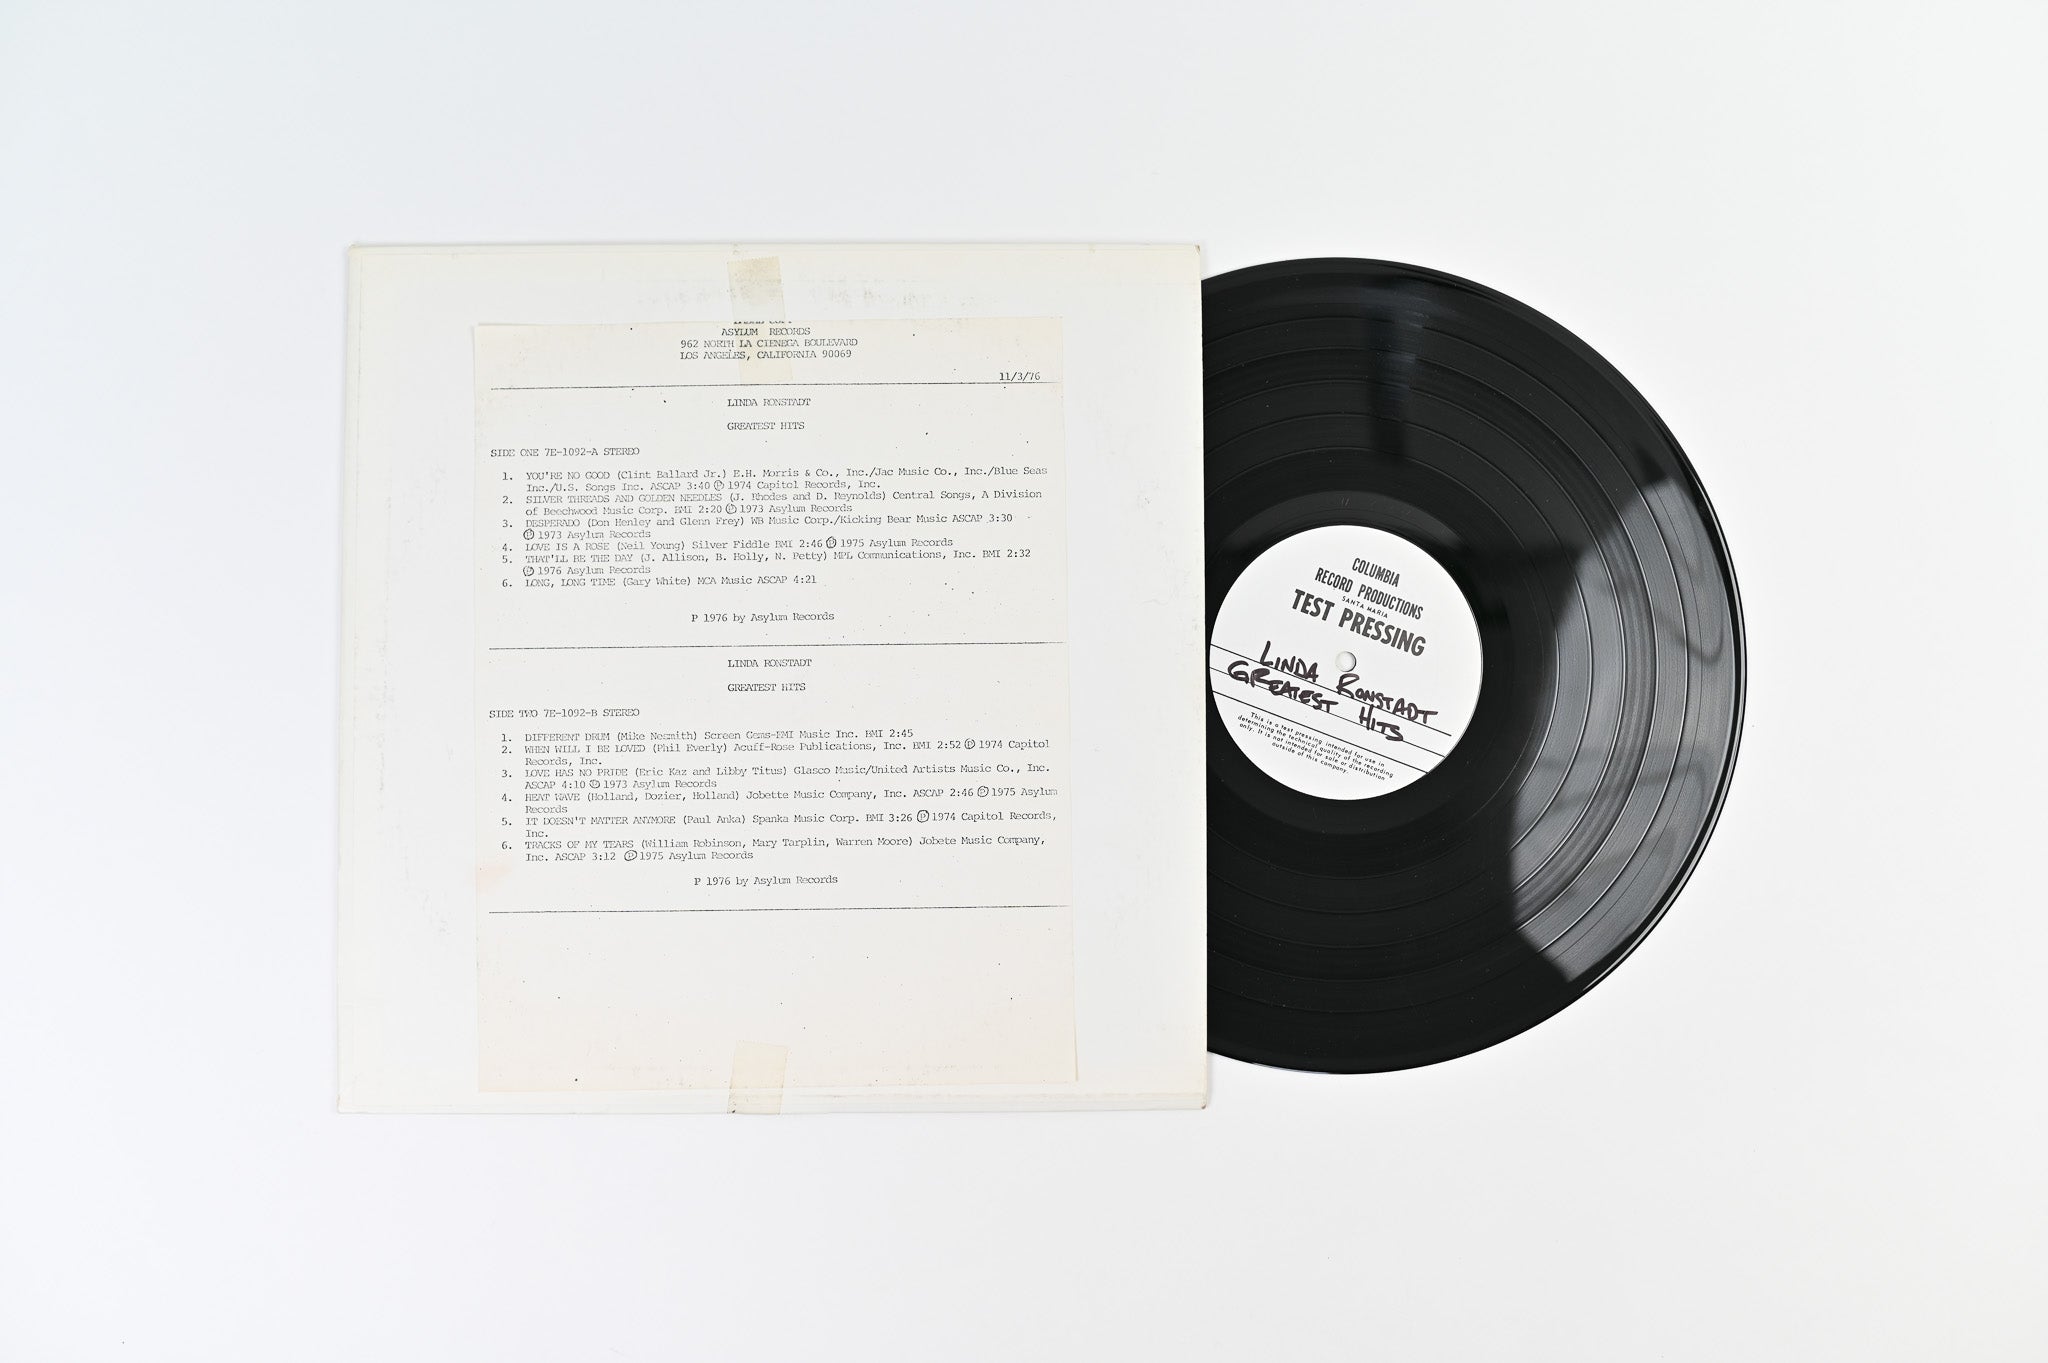 Linda Ronstadt - Greatest Hits Columbia Records Test Pressing